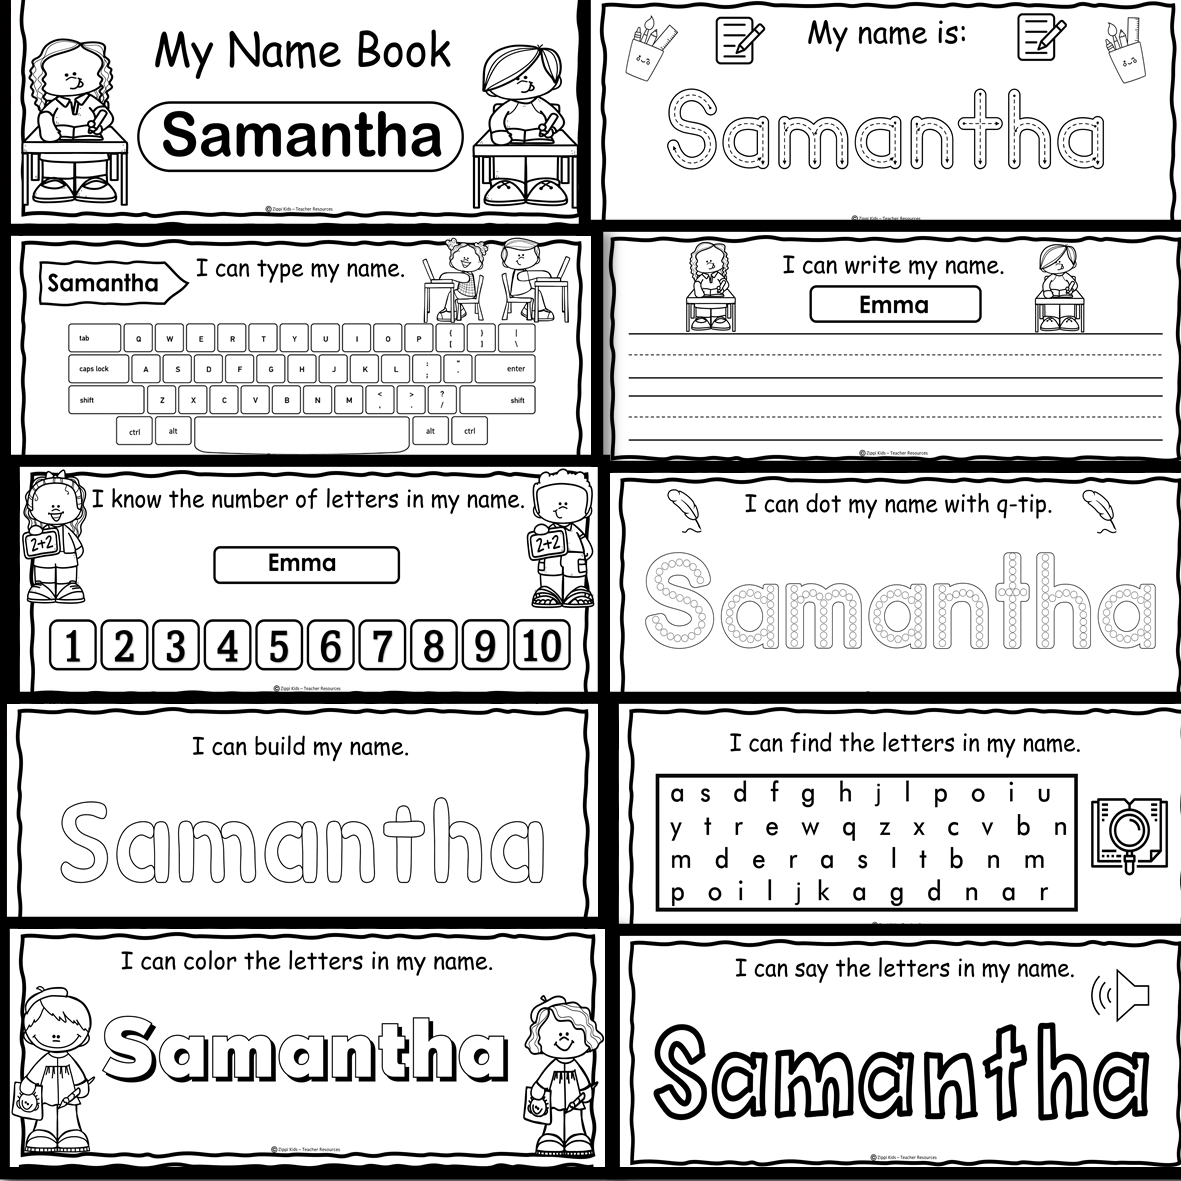 Easy Way To Help Your Child Learn Their Name - FREE Editable Name